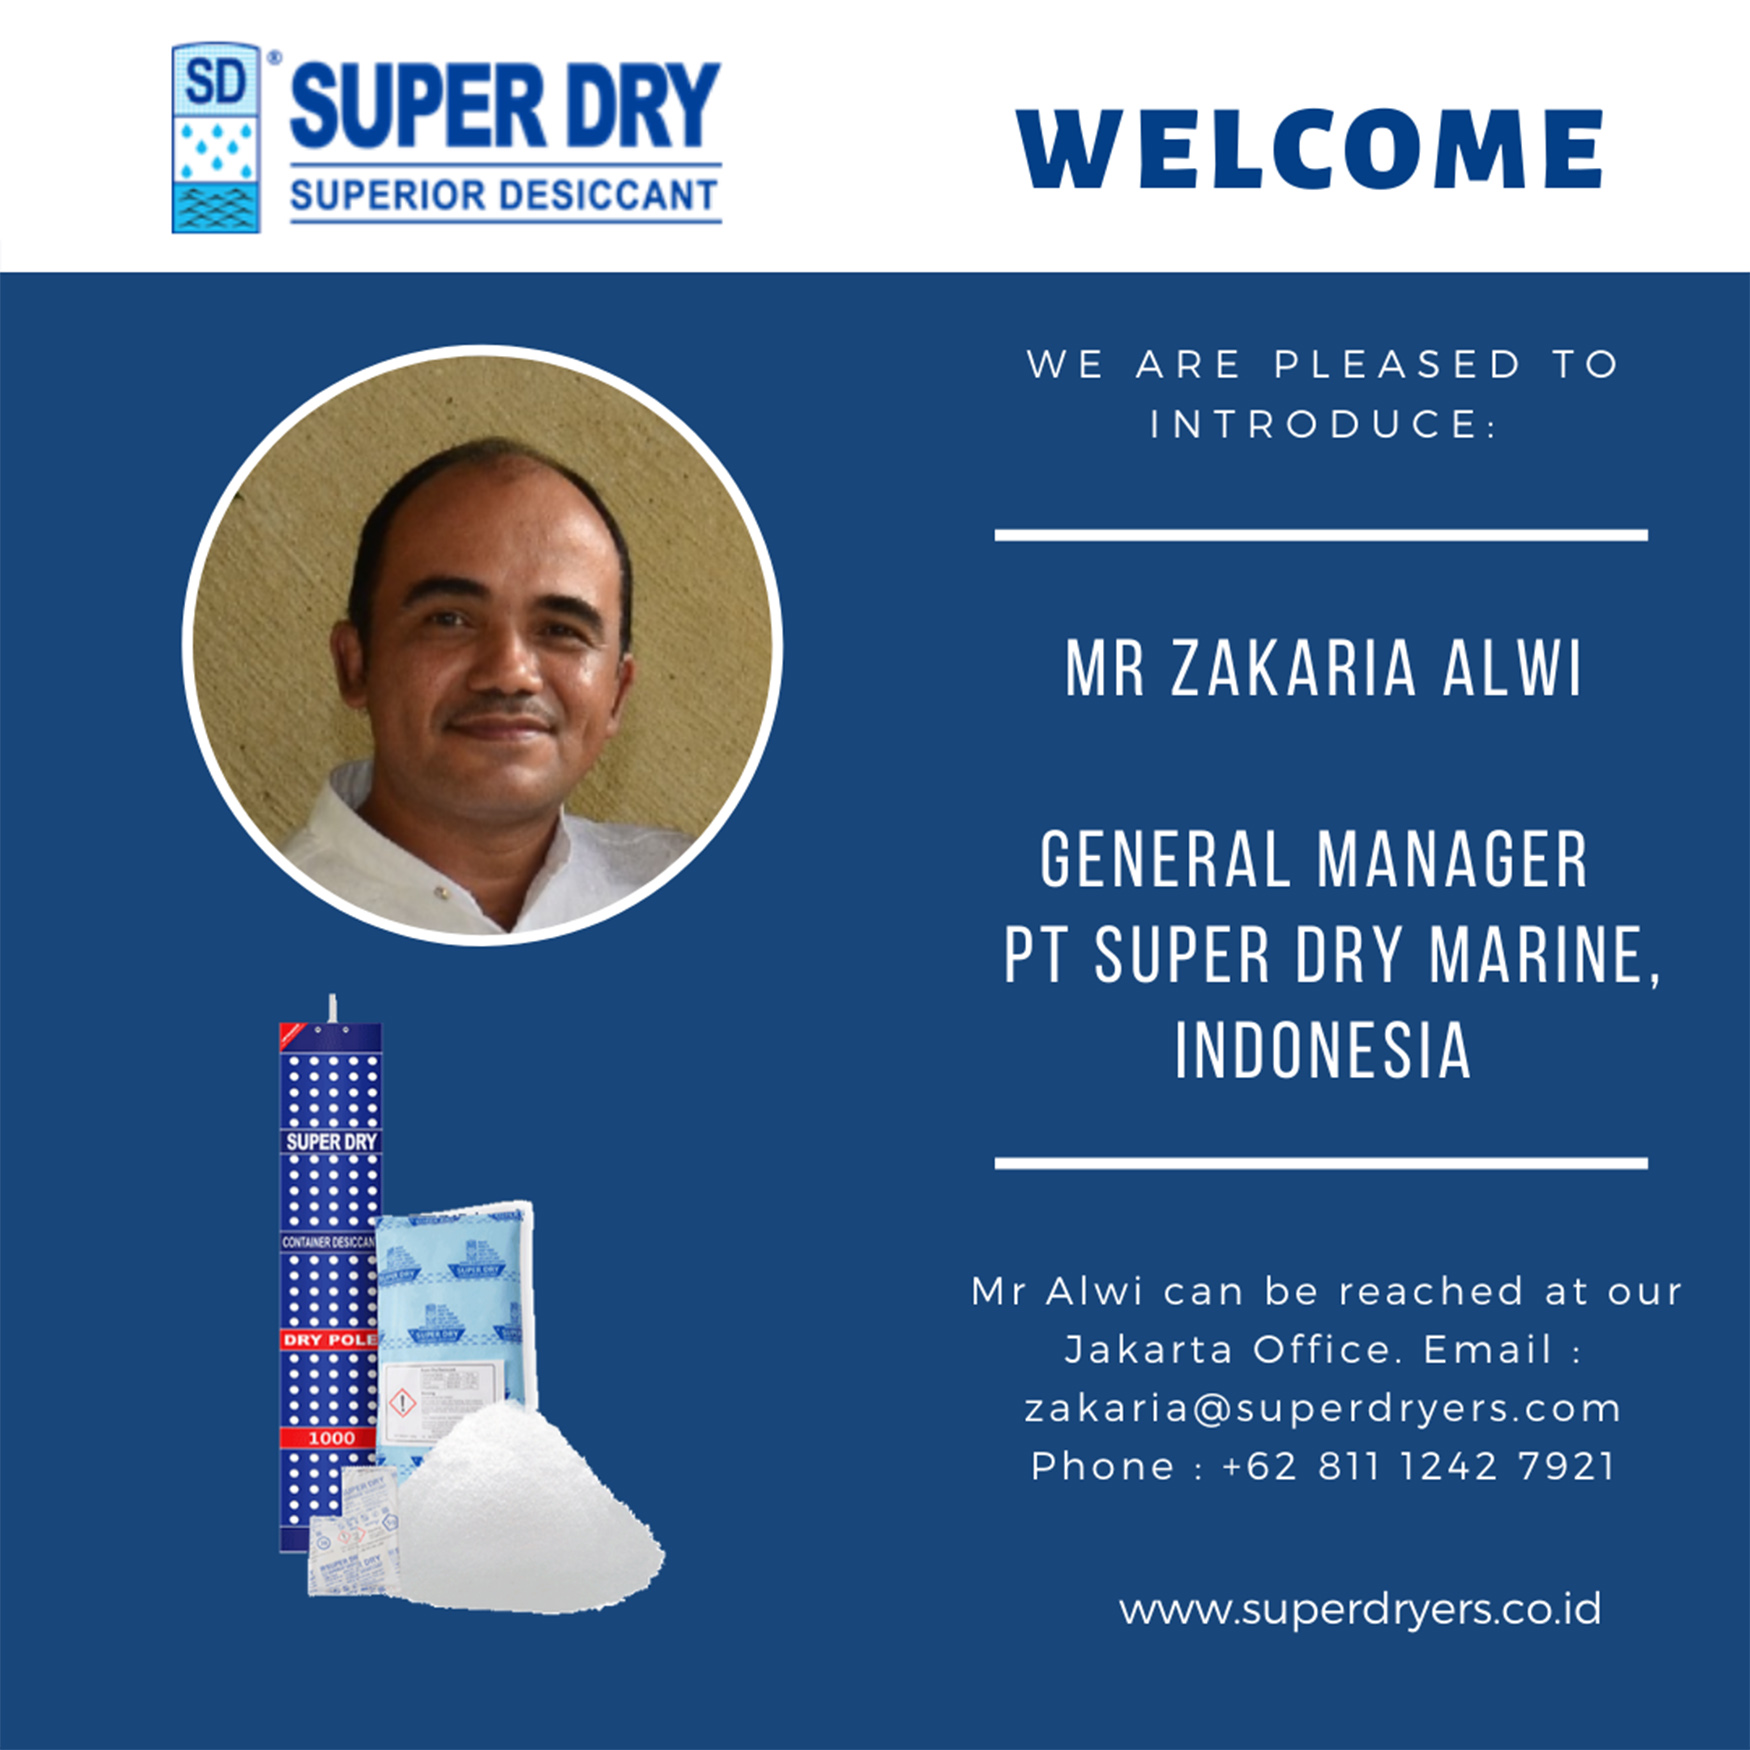 Announcement for new General Manager of PT Super Dry Marine